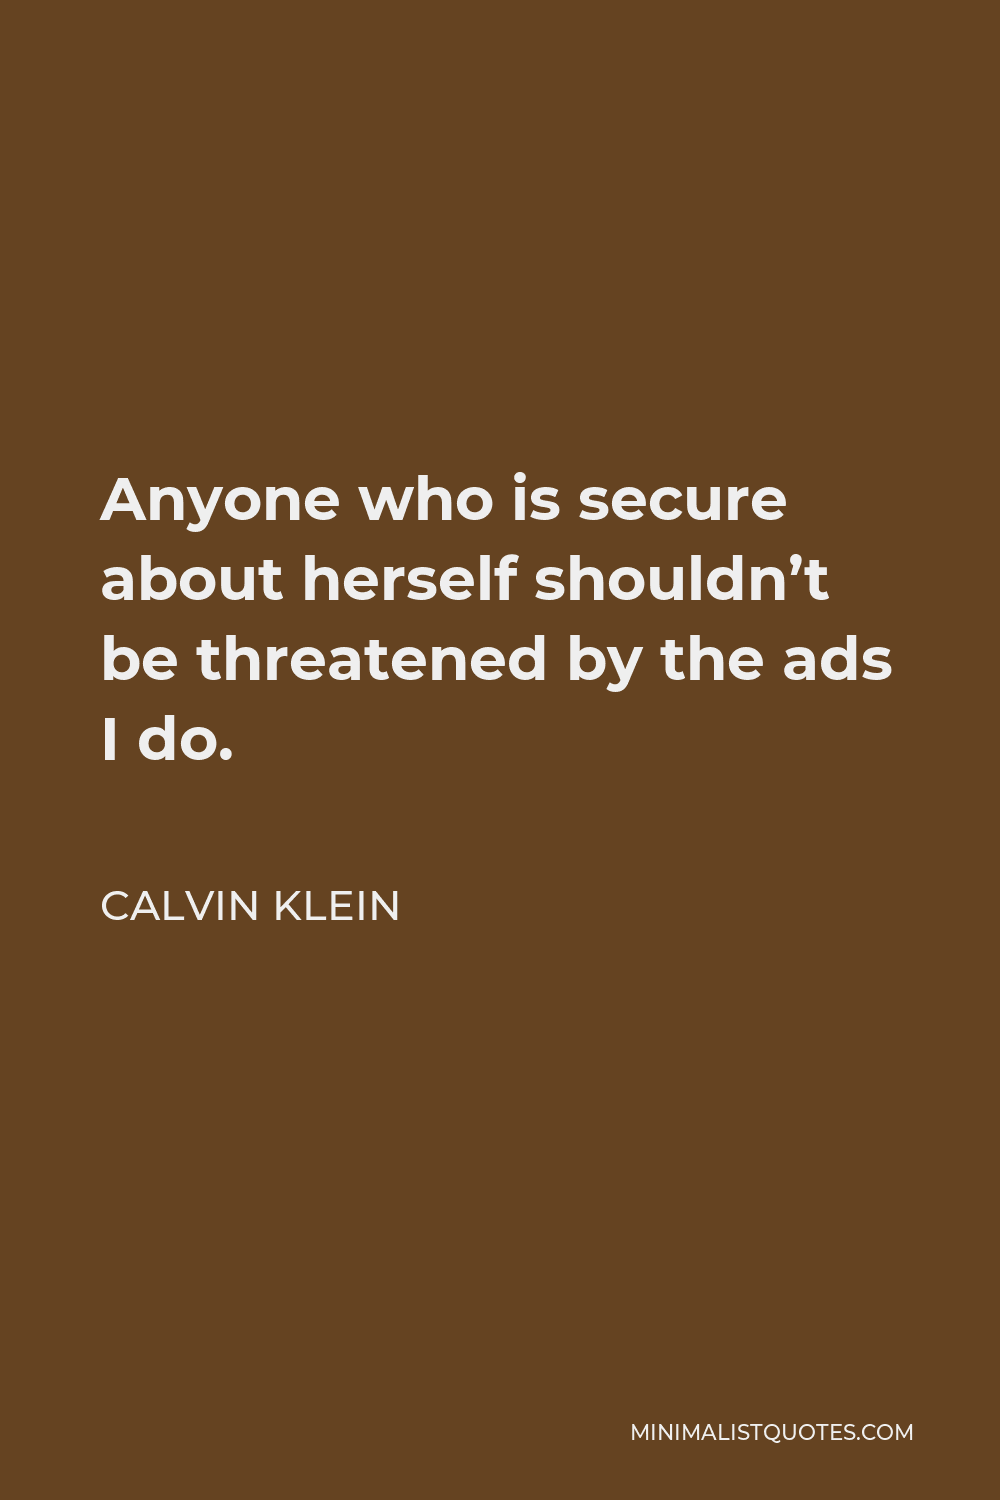 Calvin Klein Quote - Anyone who is secure about herself shouldn’t be threatened by the ads I do.